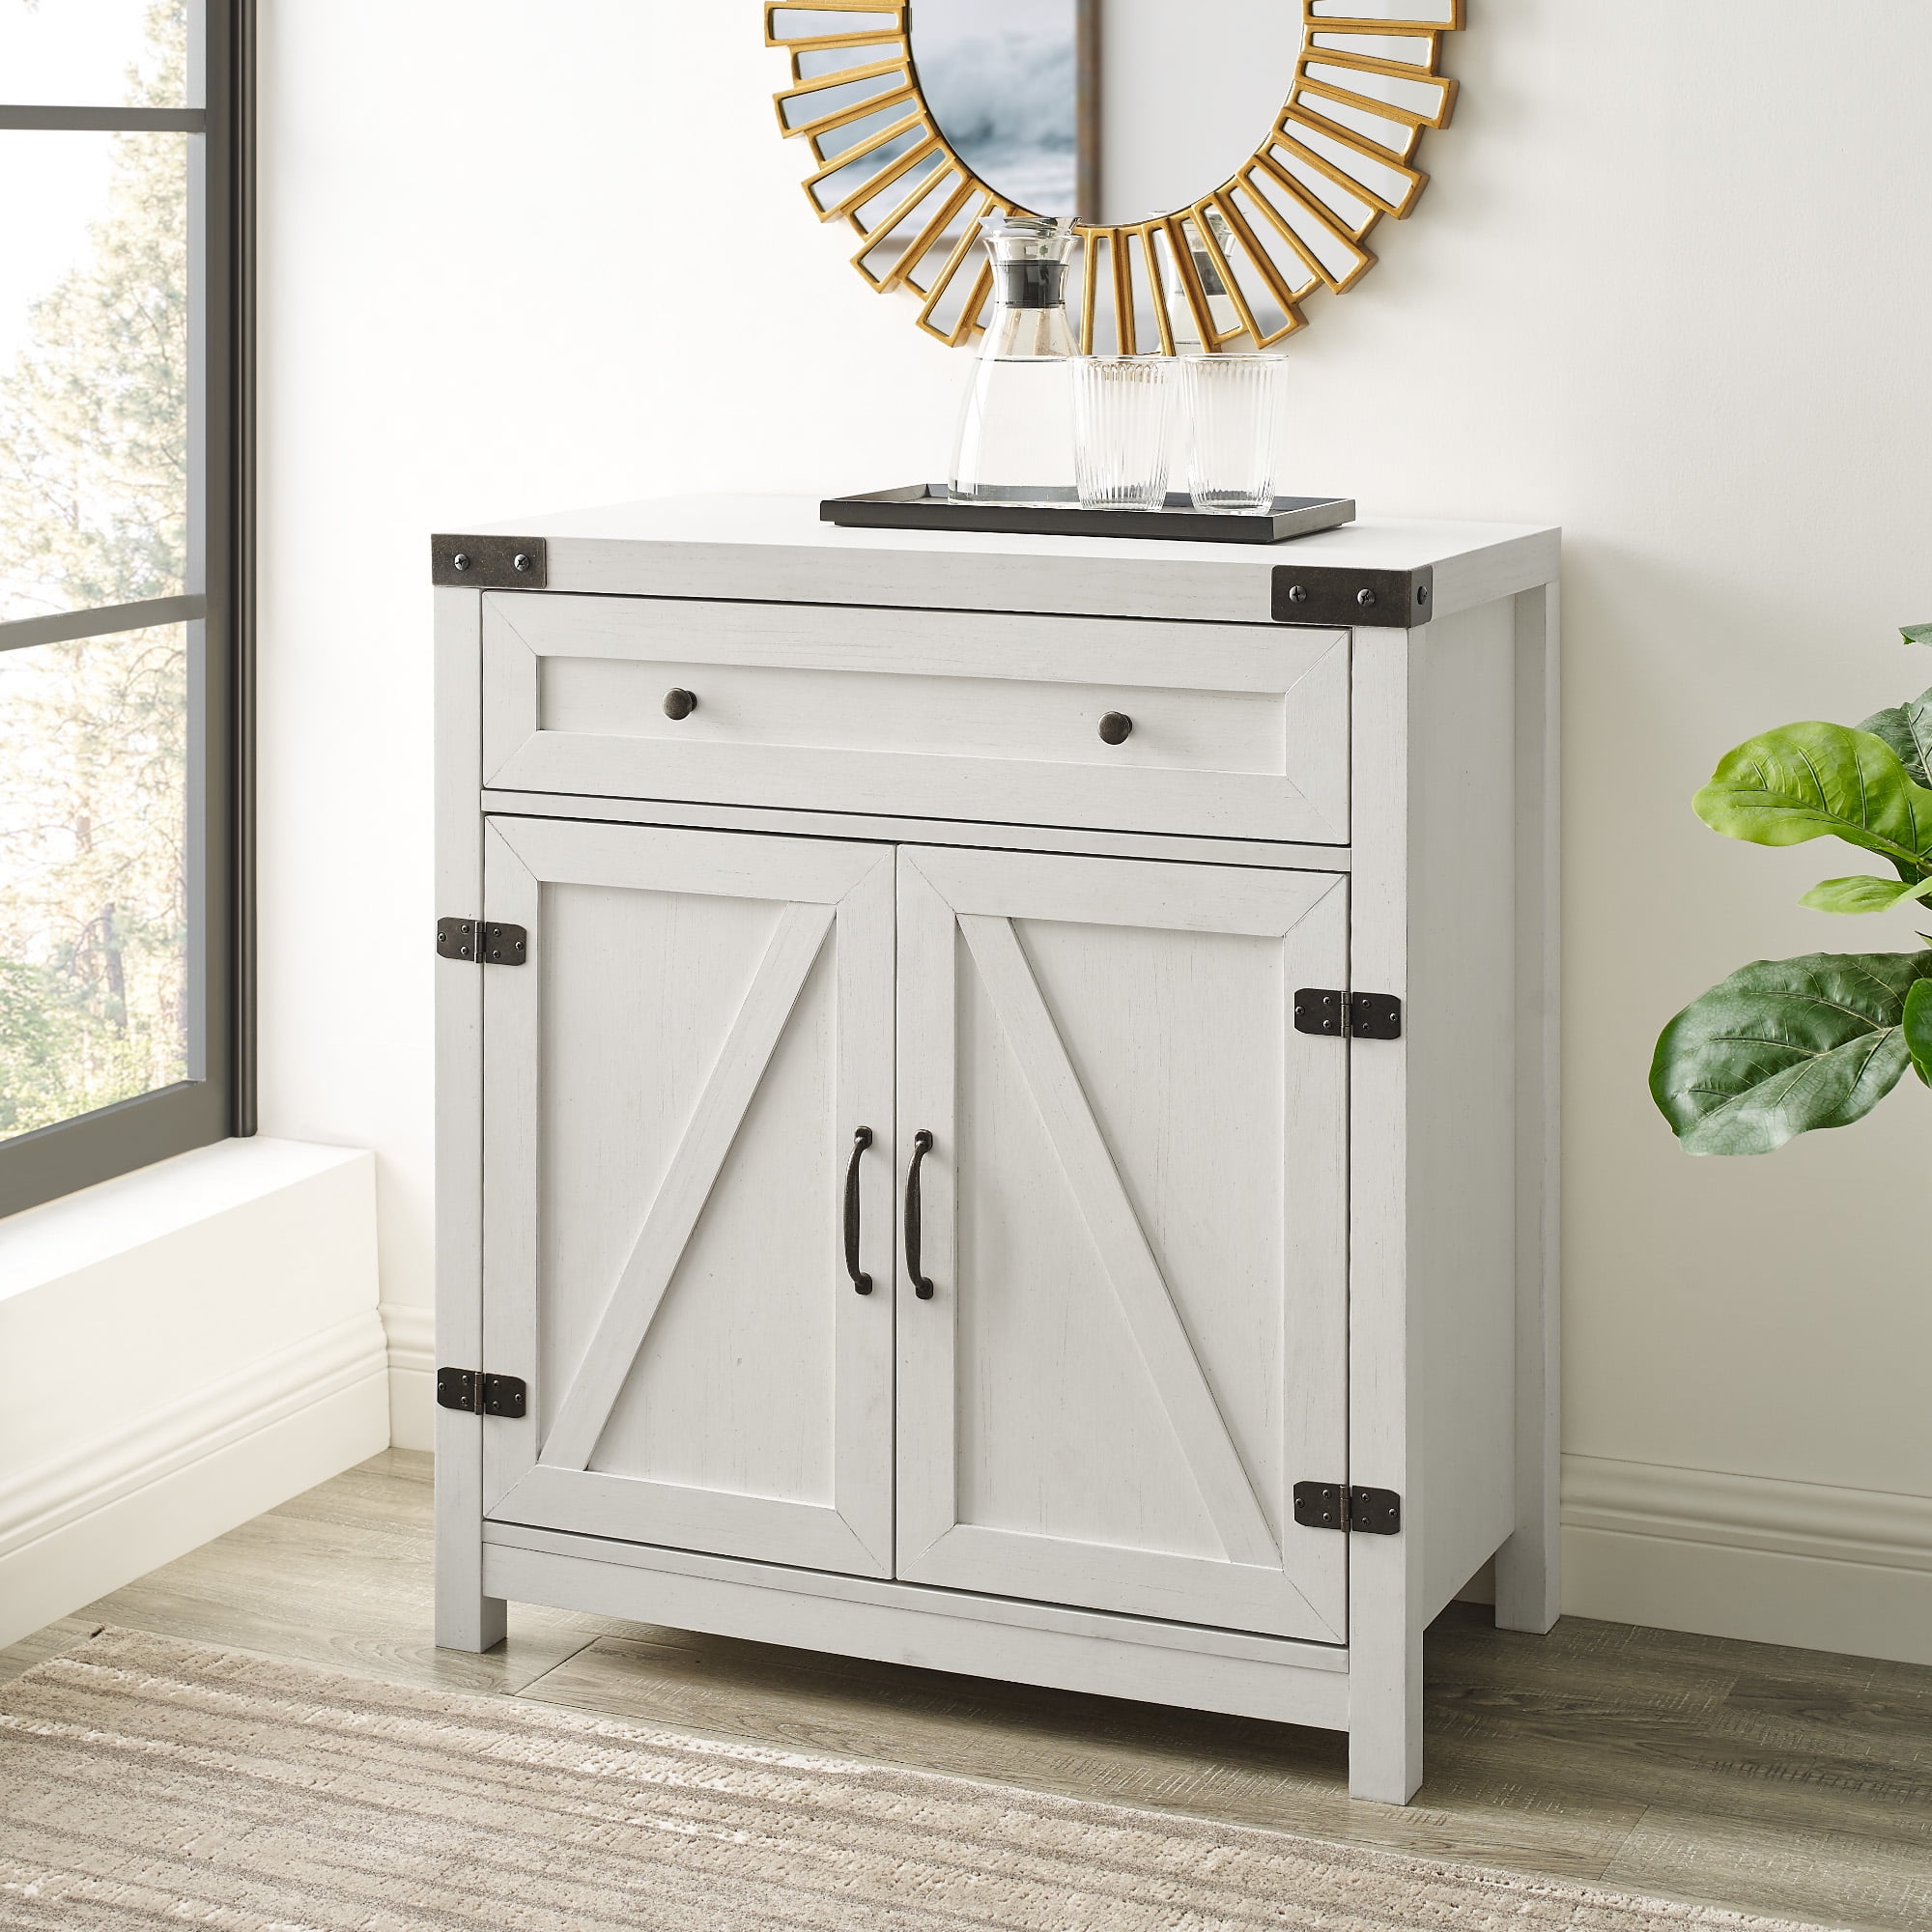 Woven Paths Modern Farmhouse Barn Door Accent Cabinet, Brushed White ...